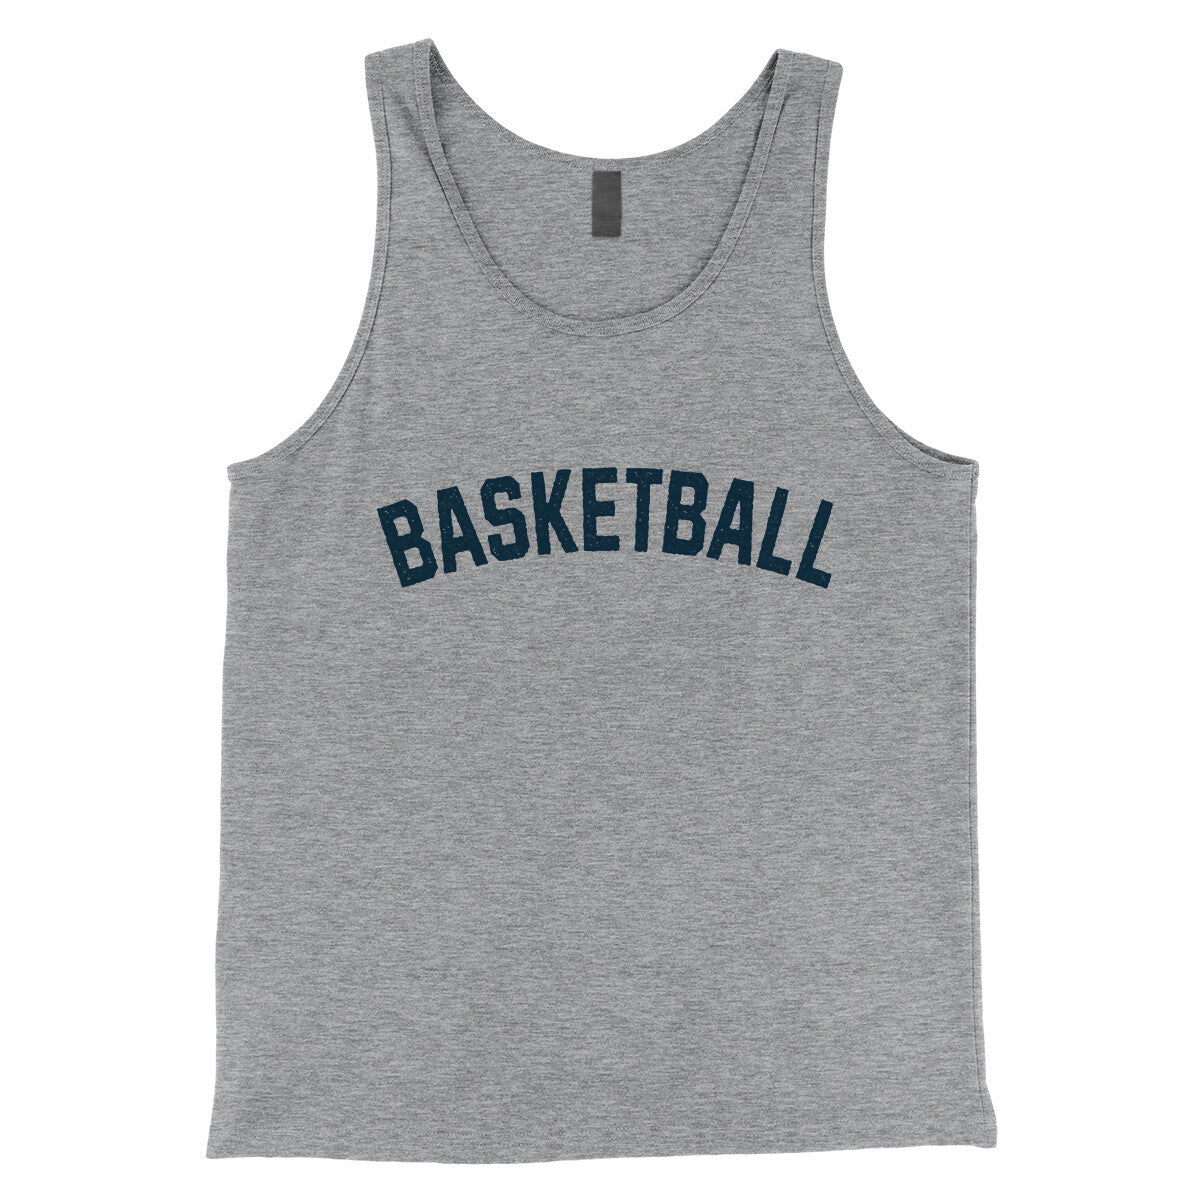 Basketball in Athletic Heather Color